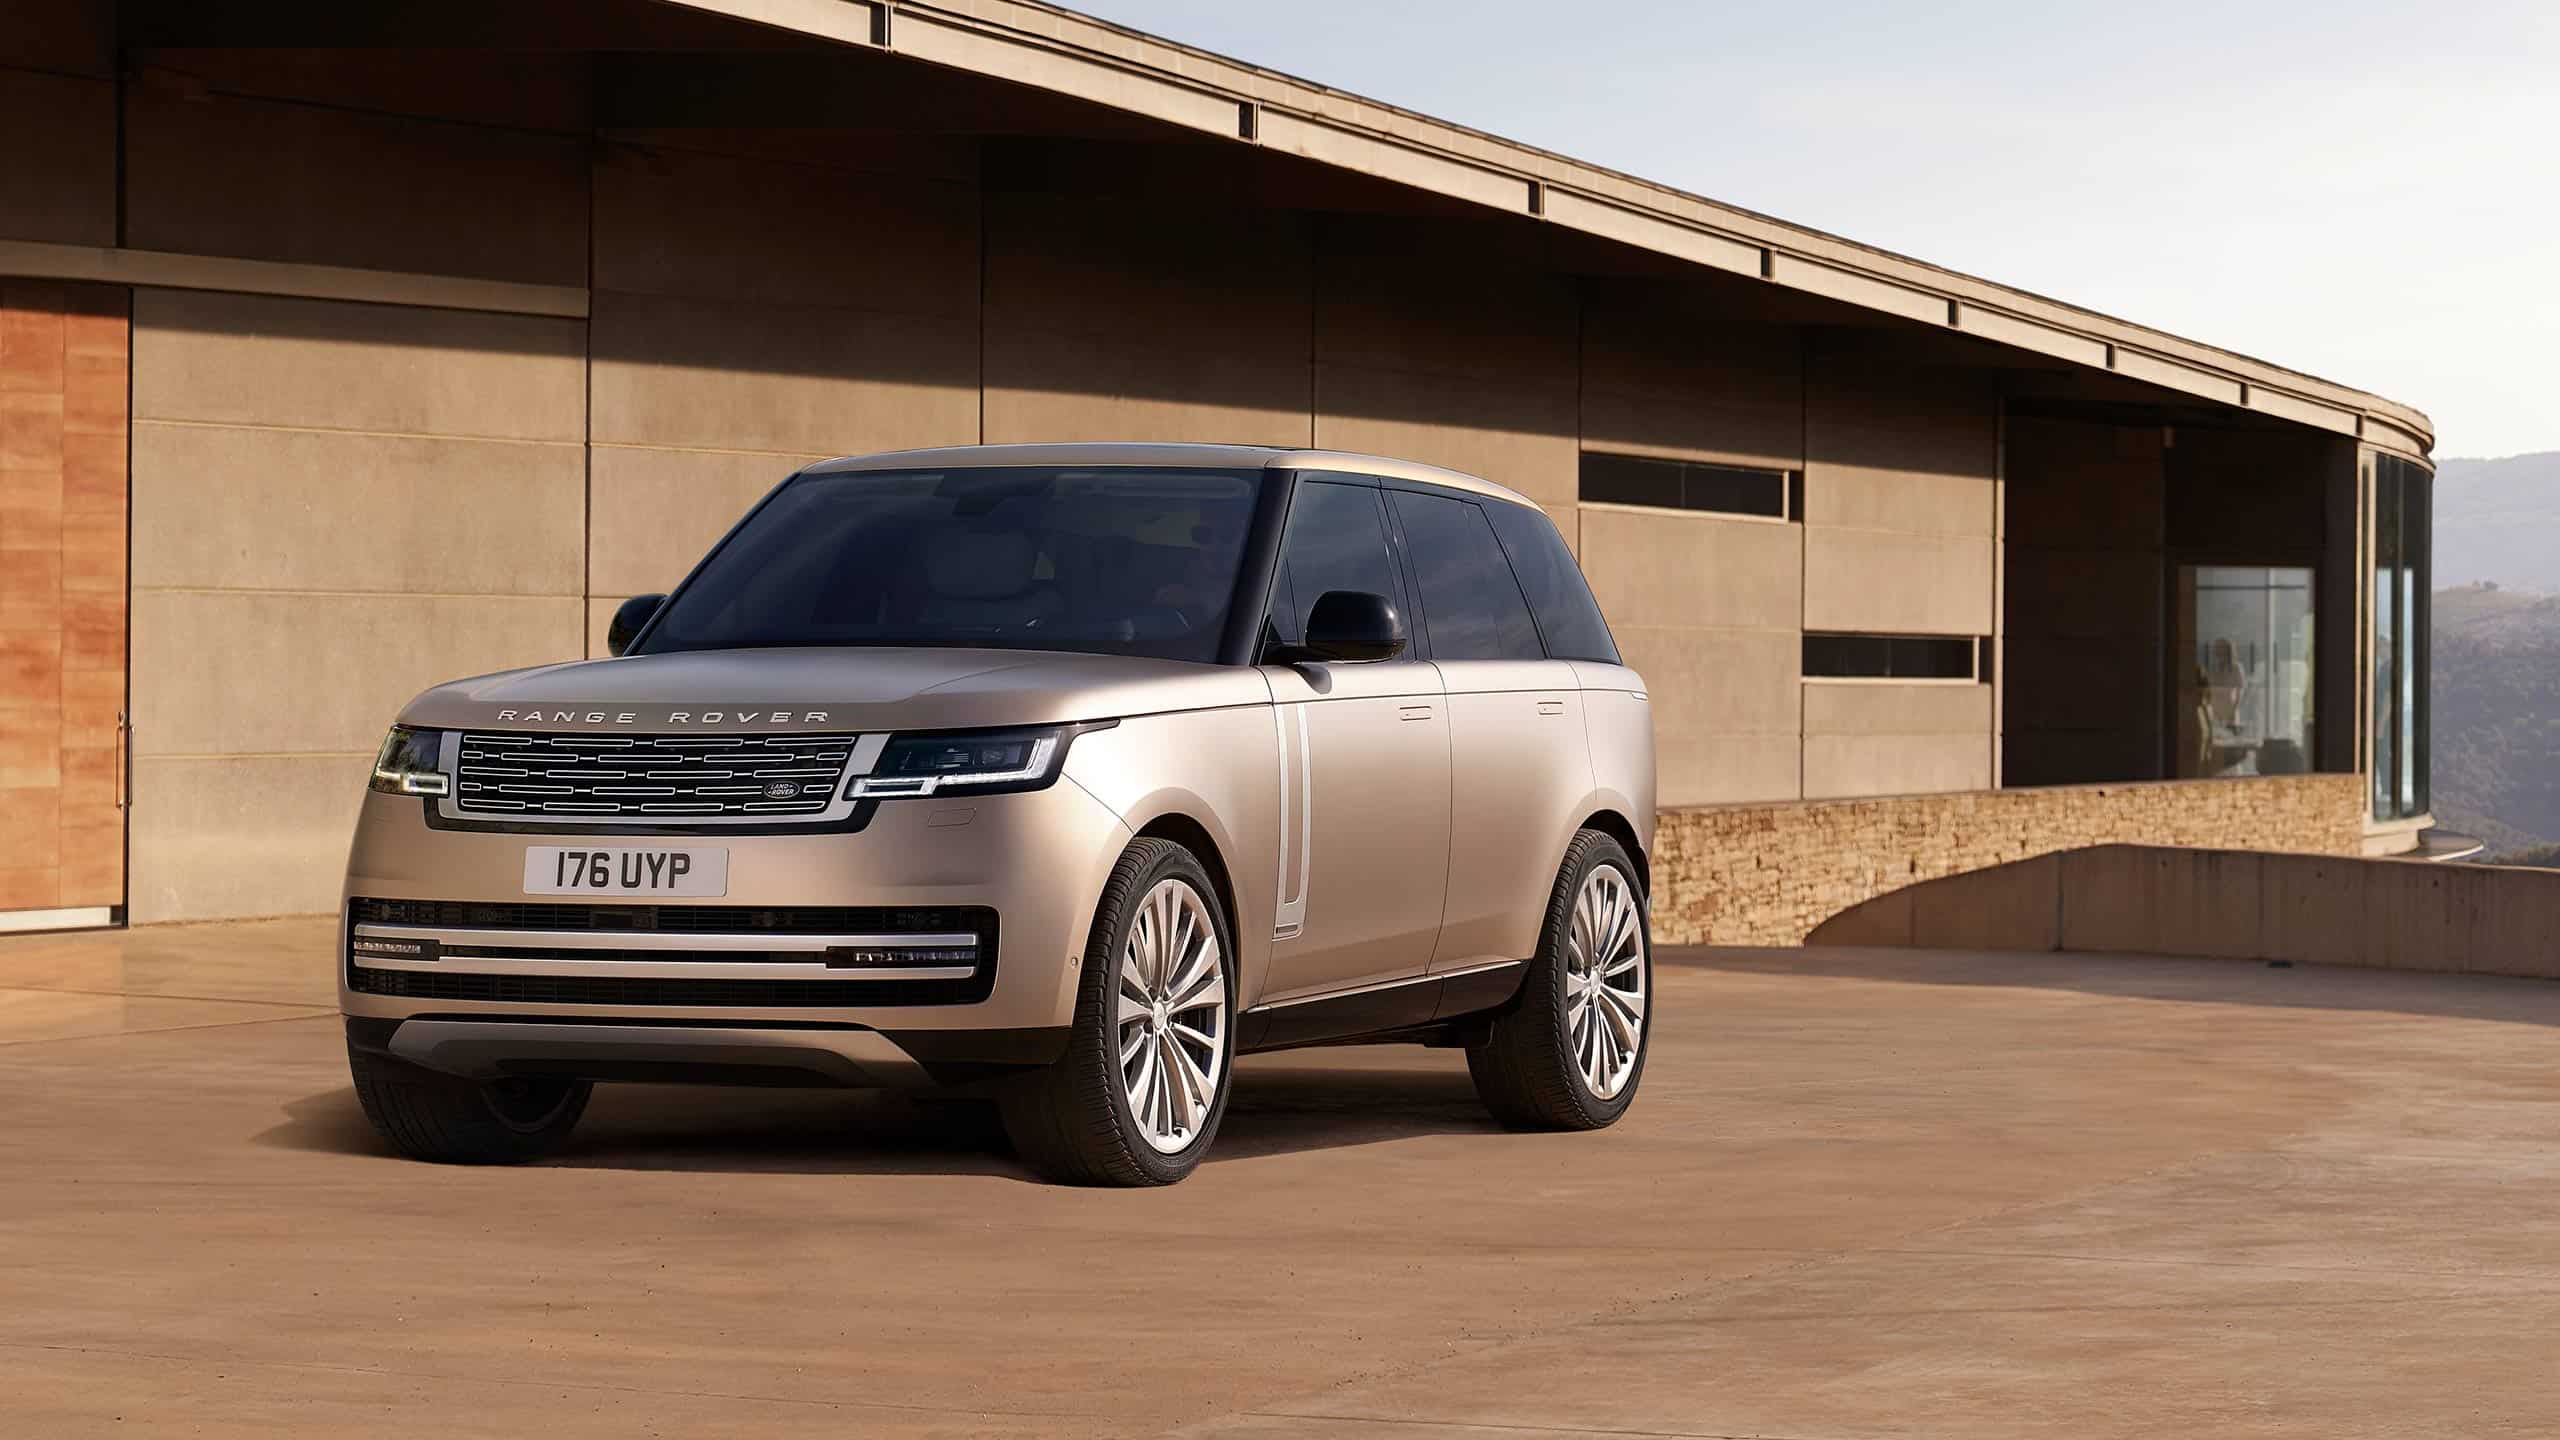 New Range Rover in gold front side view